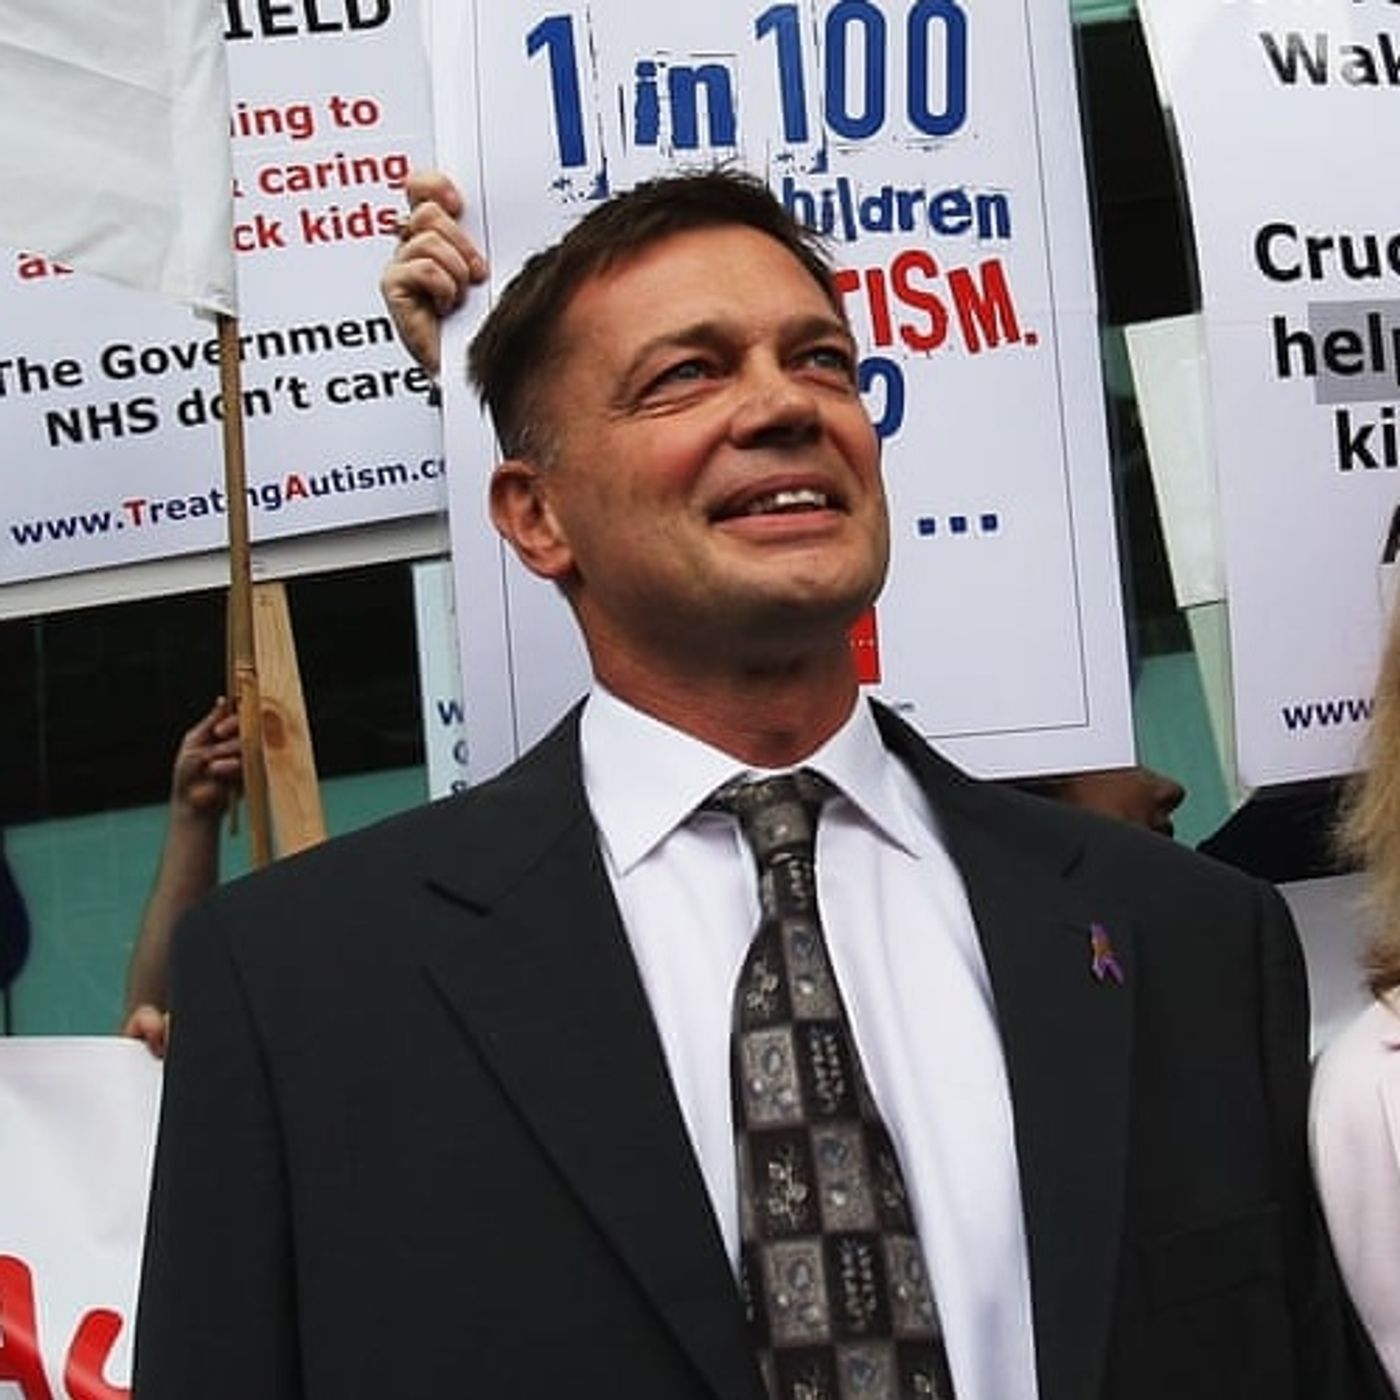 #579: A Diabolical Agenda With Dr. Andrew Wakefield